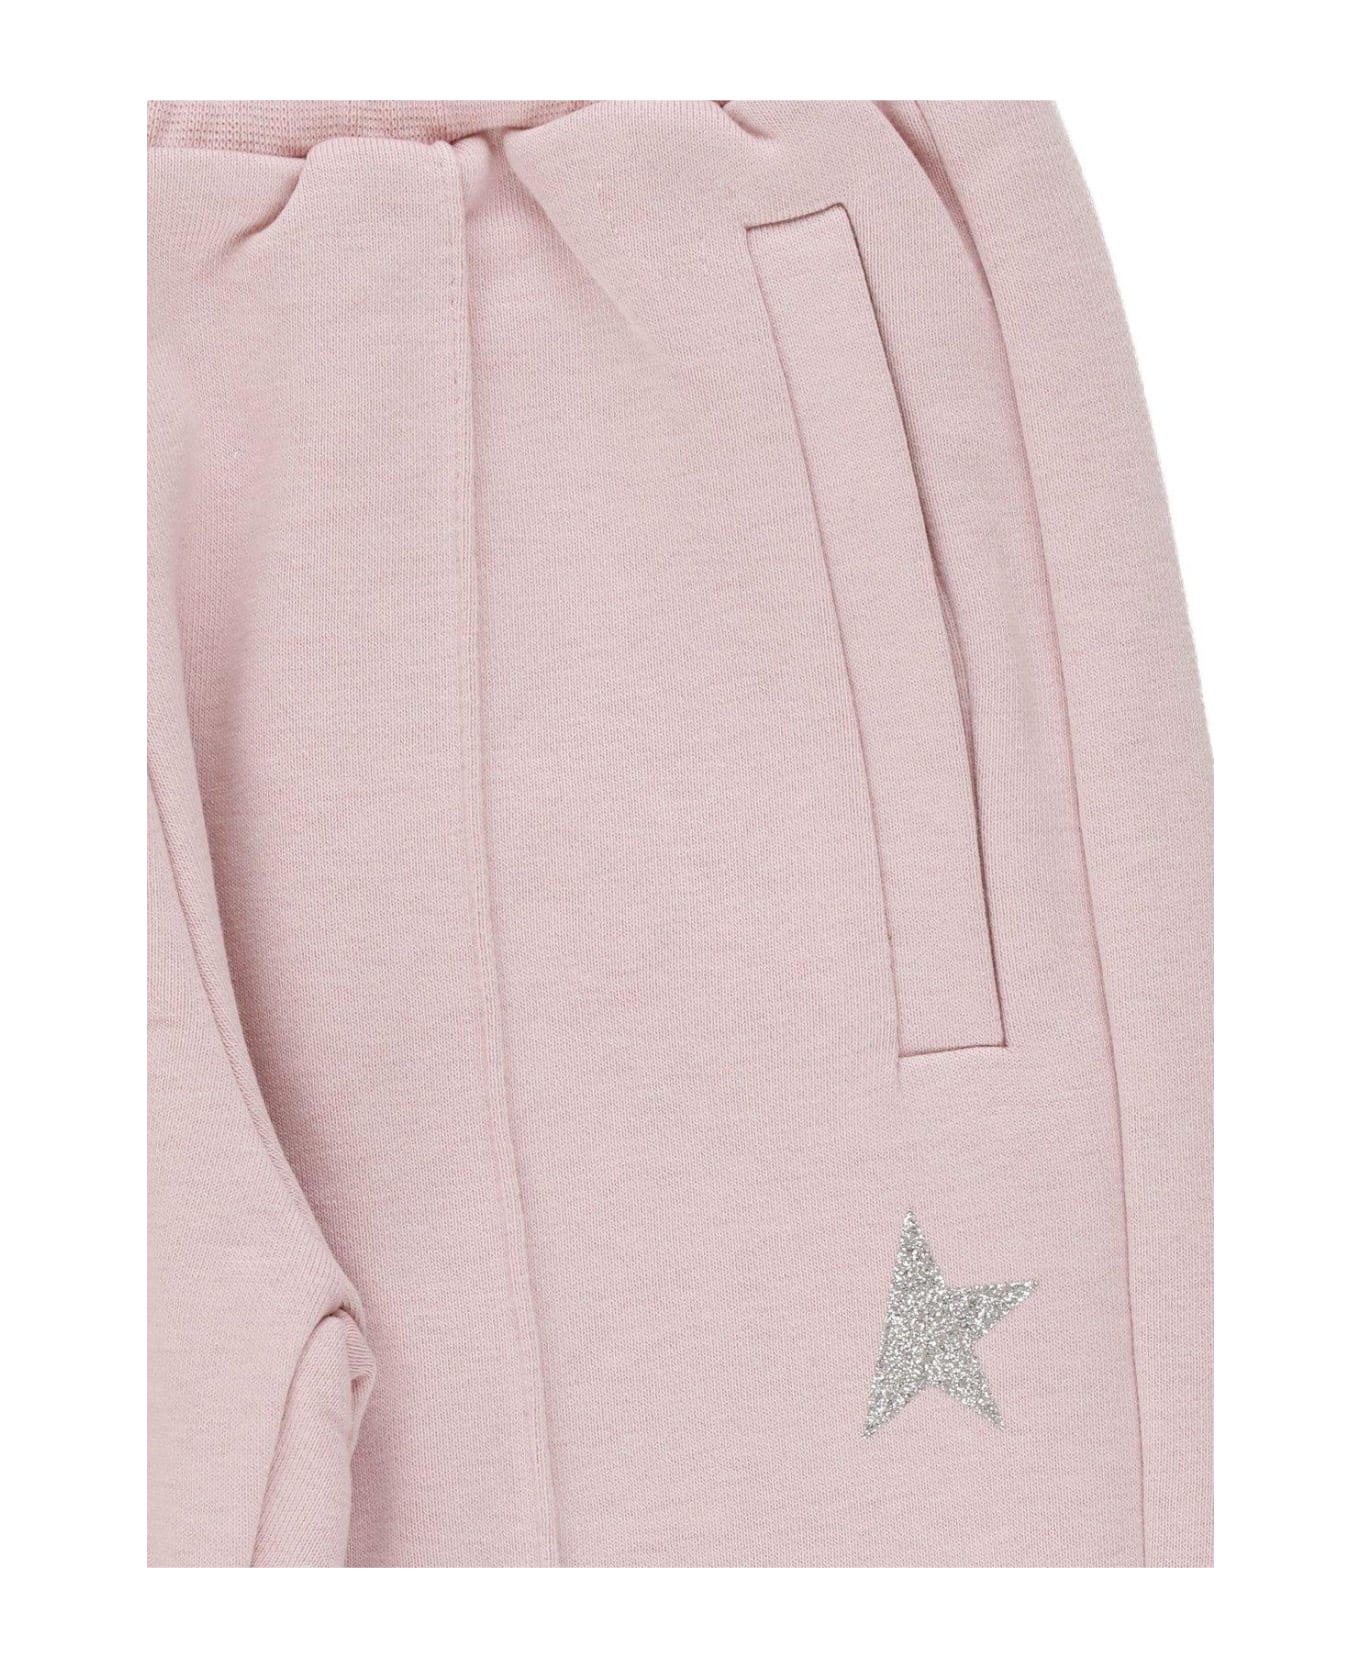 Golden Goose Logo Detailed Straight Leg Trousers - Pink/silver ボトムス